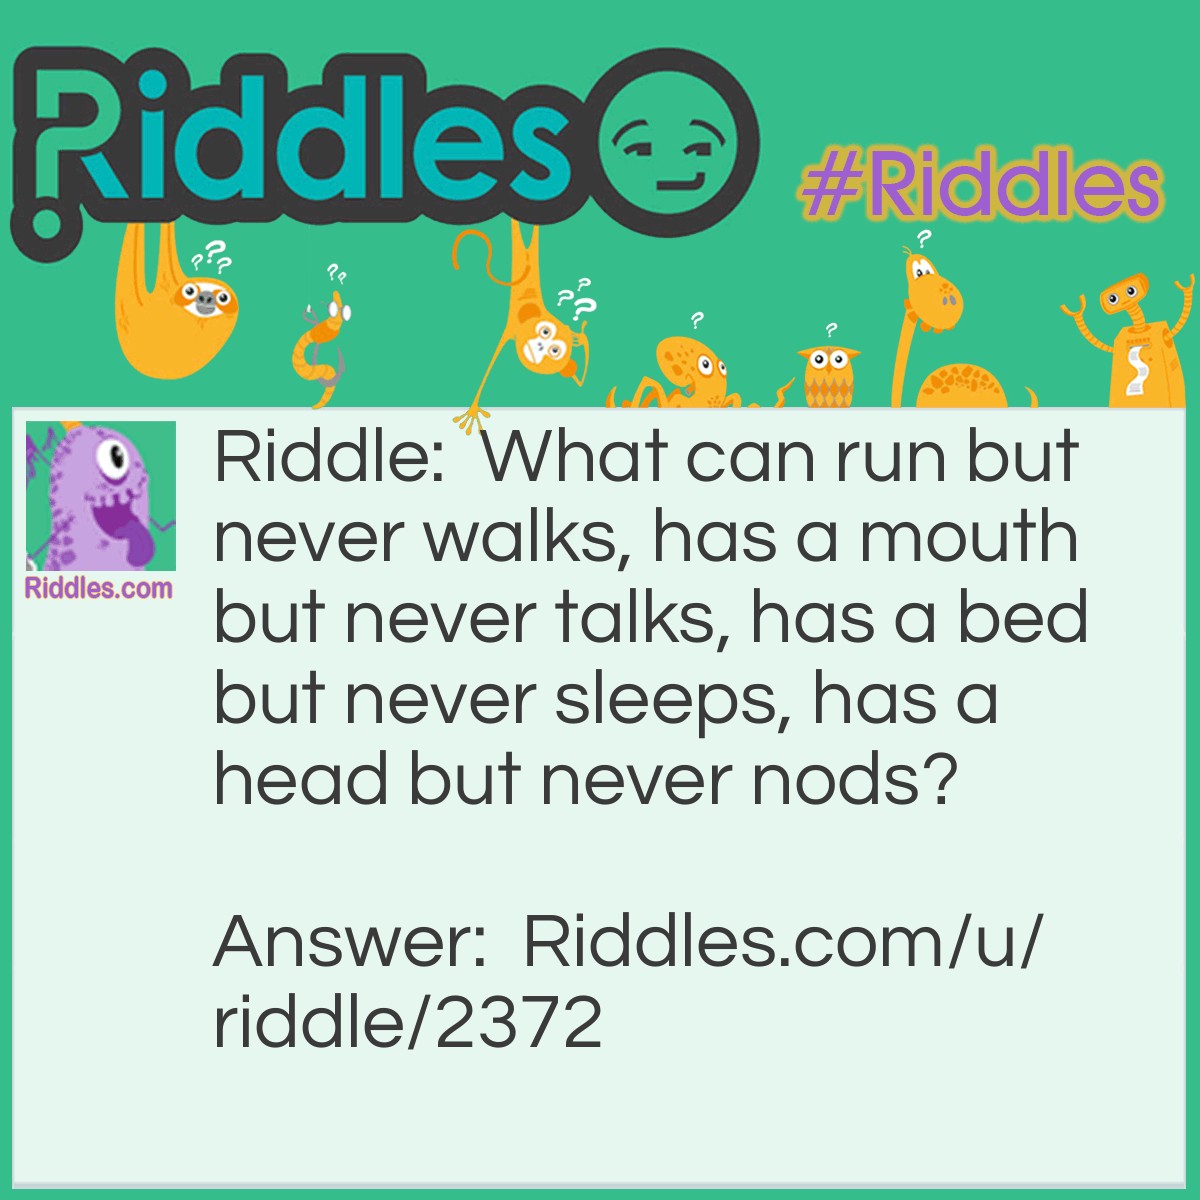 Riddle: What can run but never walks, has a mouth but never talks, has a bed but never sleeps, has a head but never nods? Answer: A river.